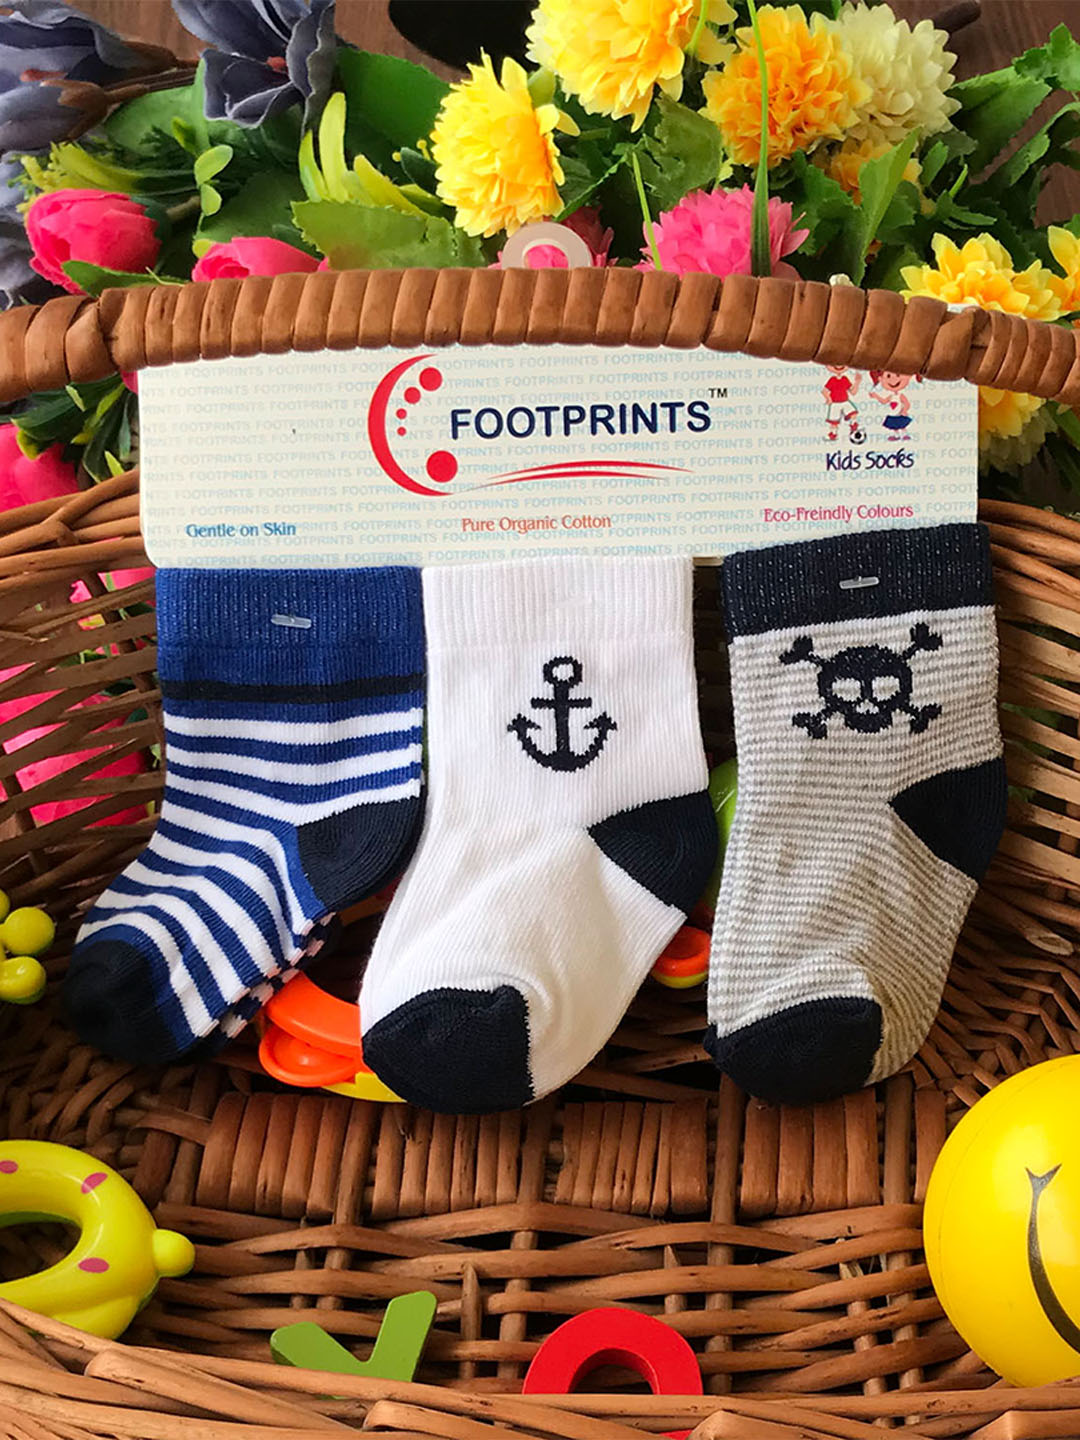 FOOTPRINTS Organic cotton Baby Boys Socks- 6-12 Months - Pack of 3 pairs - Anchor